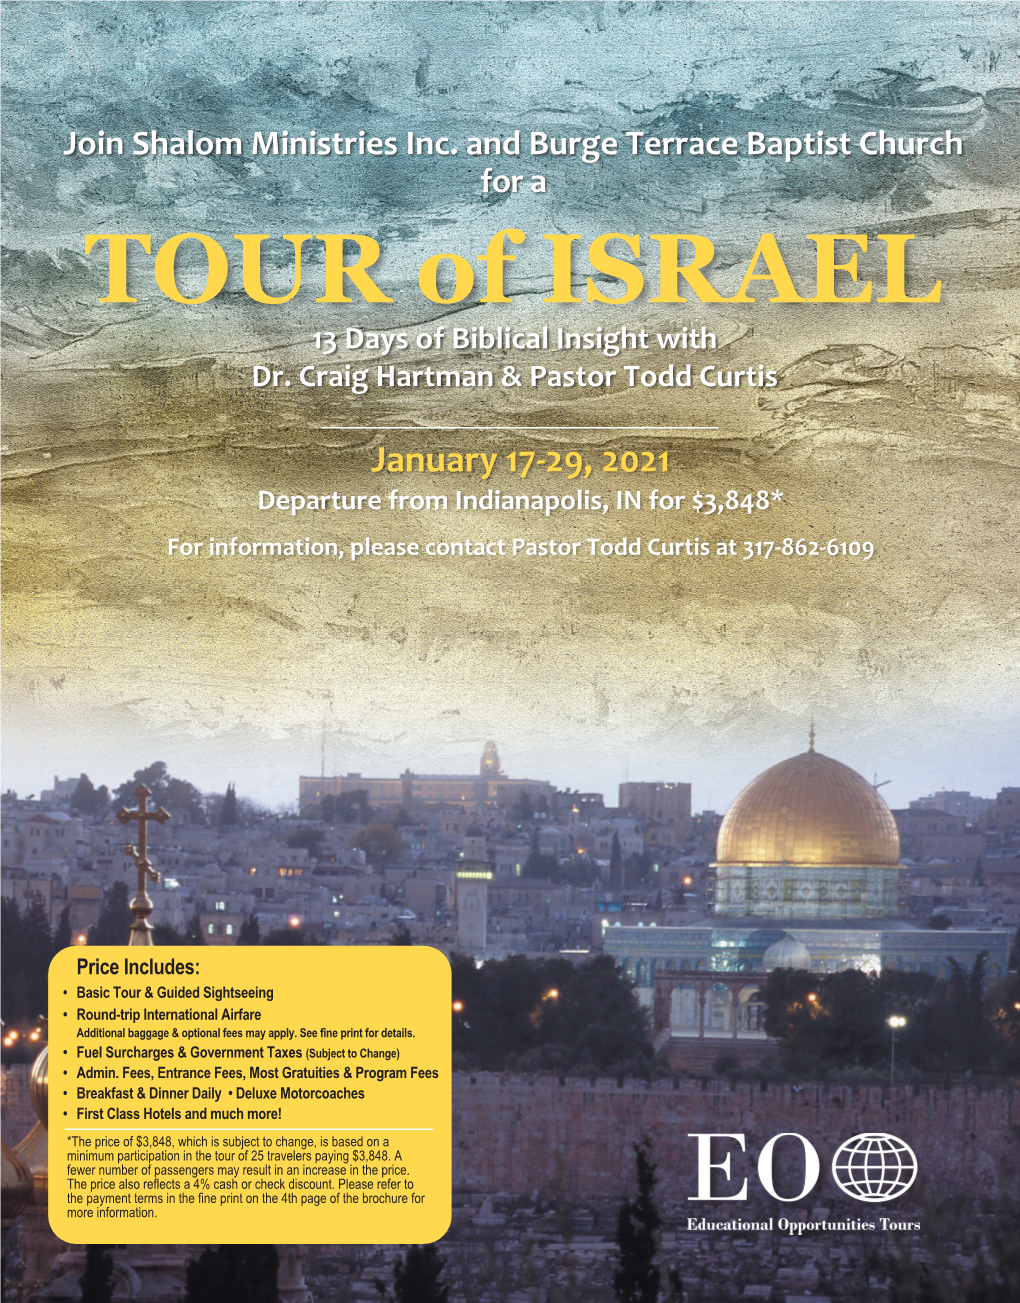 TOUR of ISRAEL 13 Days of Biblical Insight with Dr